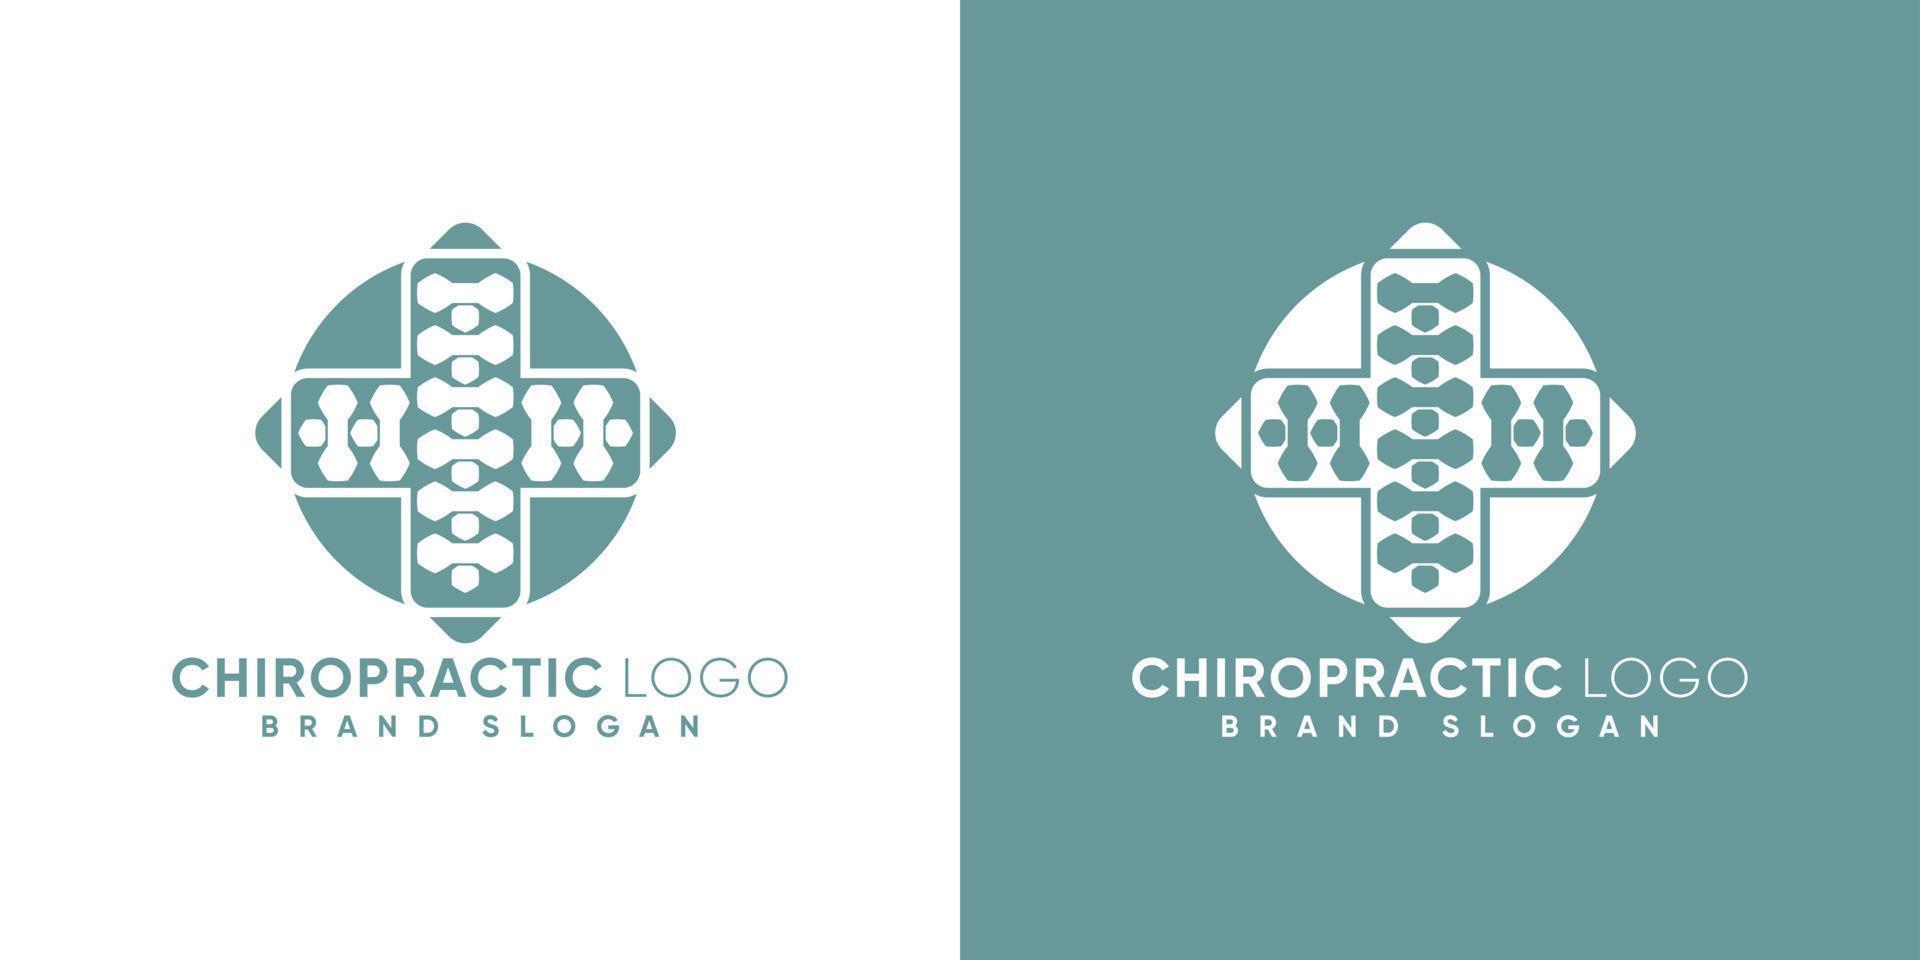 Chiropractic logo with medic sign  modern style premium vector